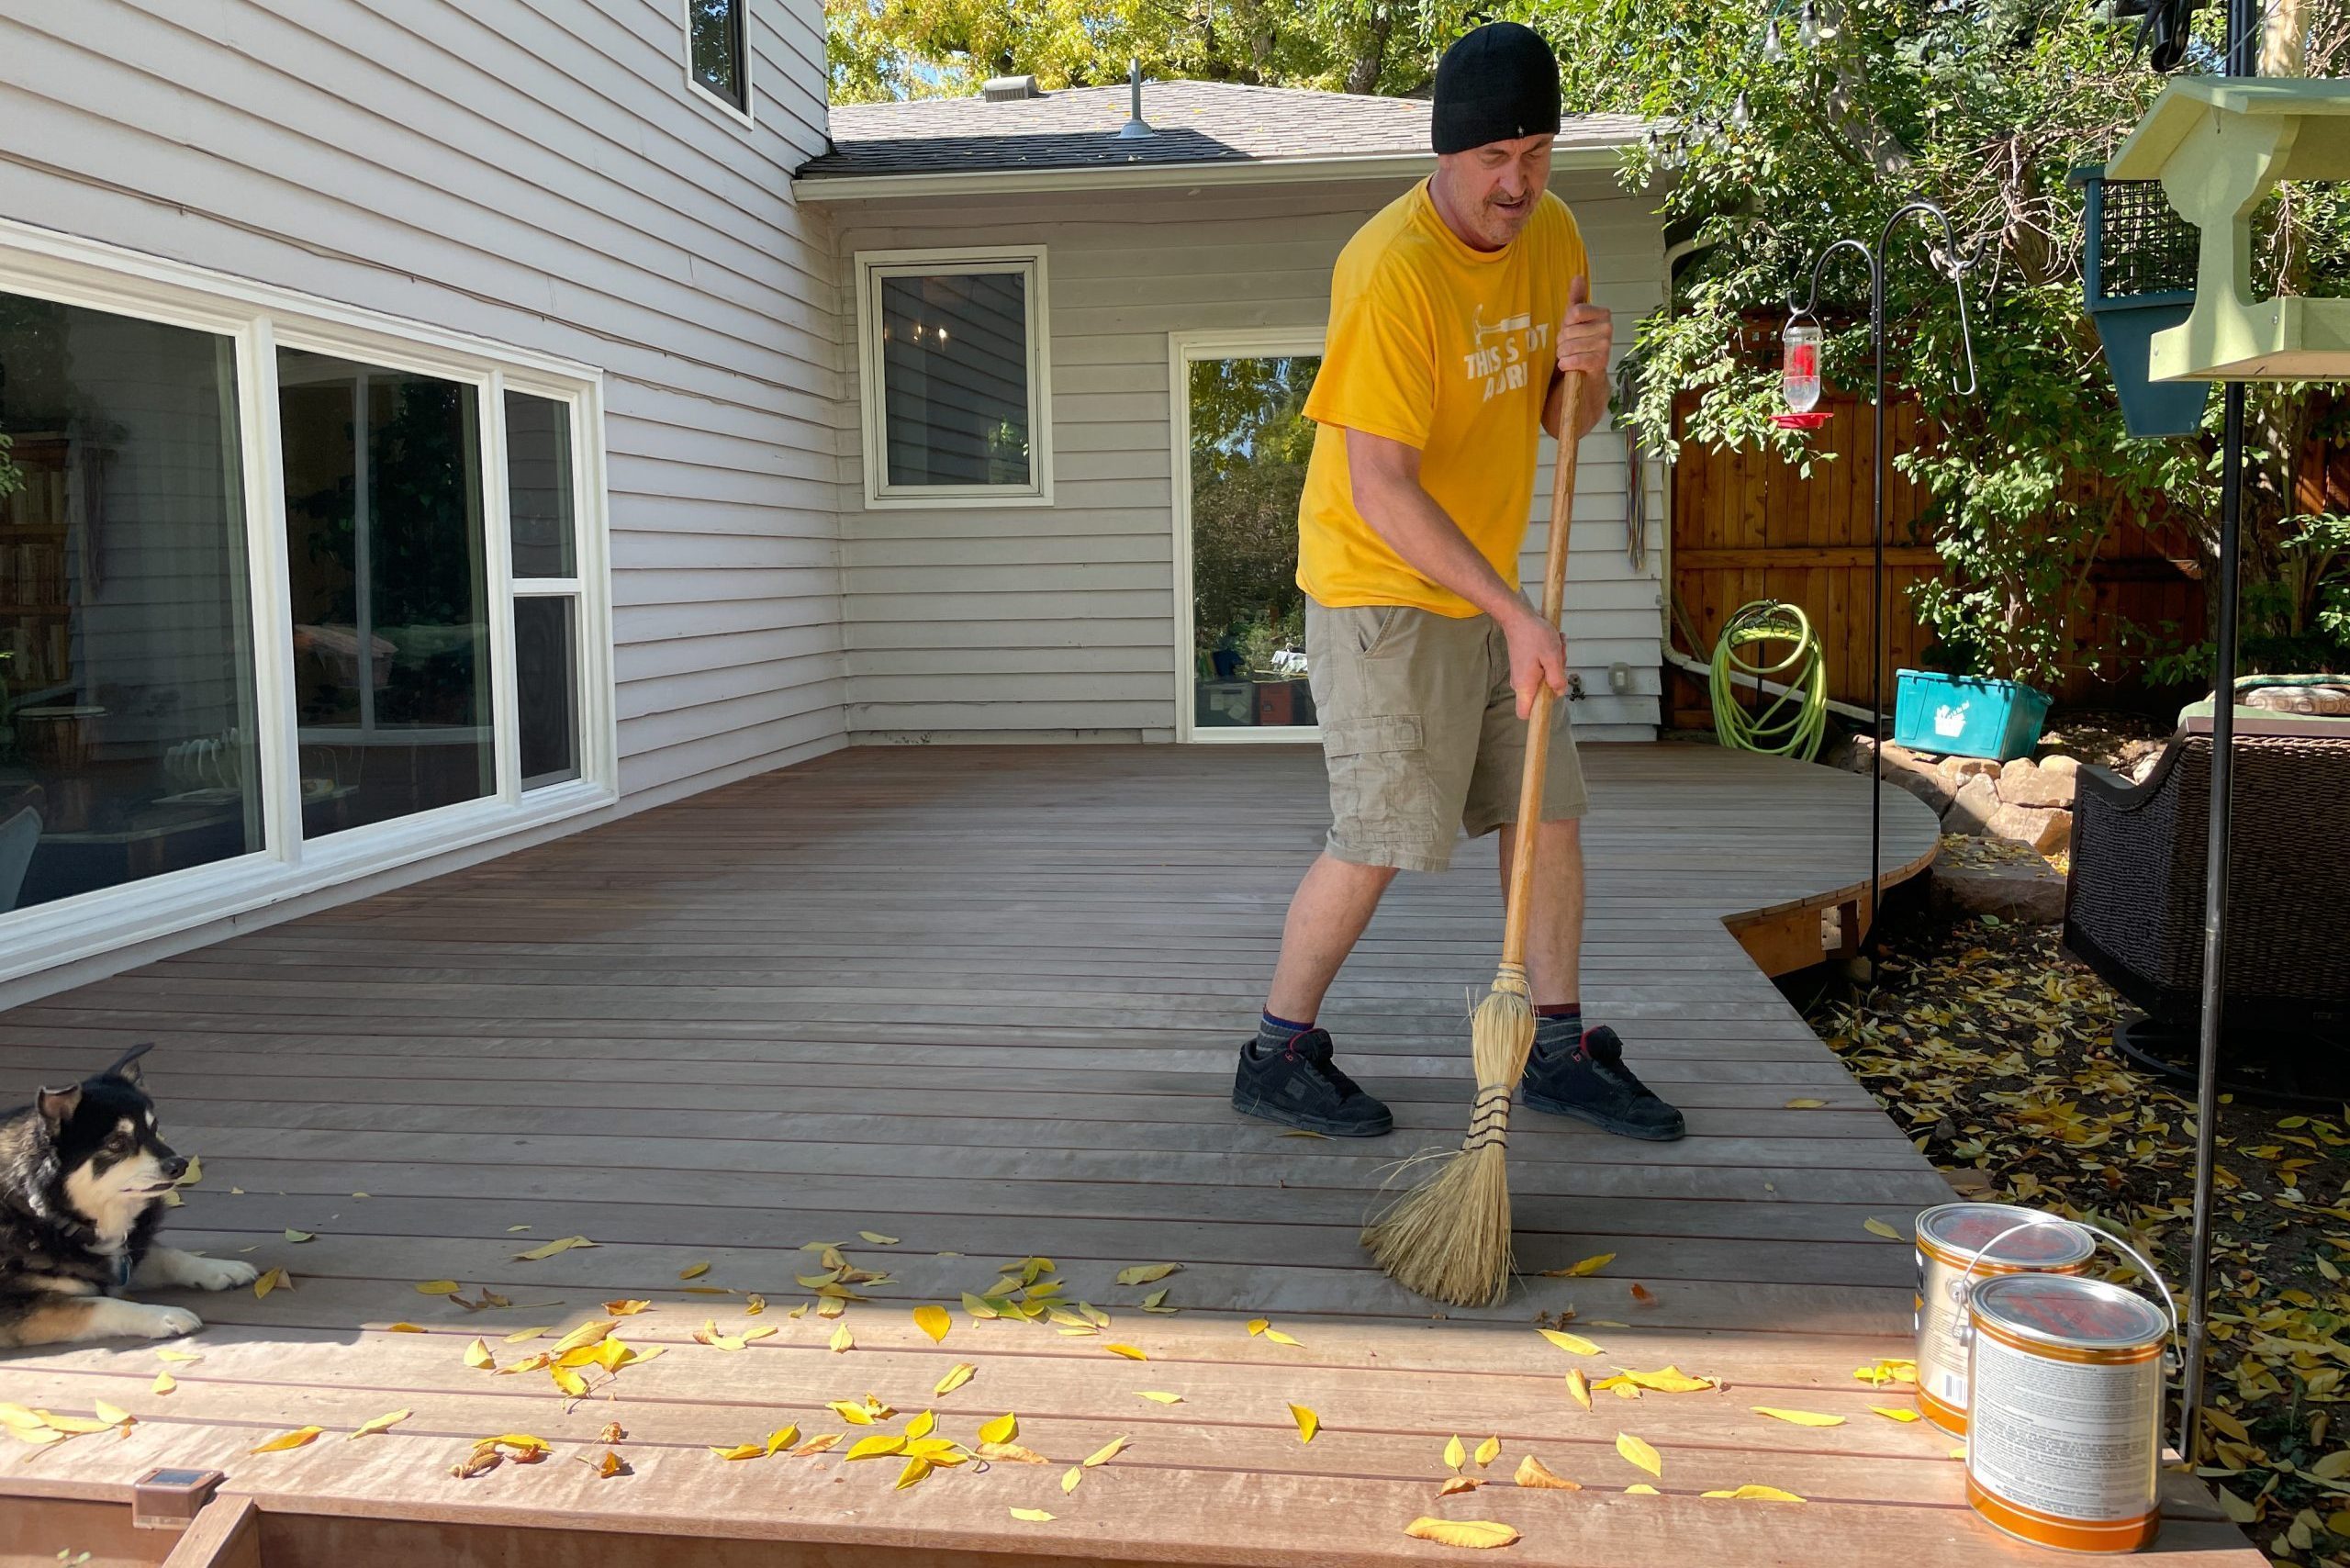 cleaning the deck